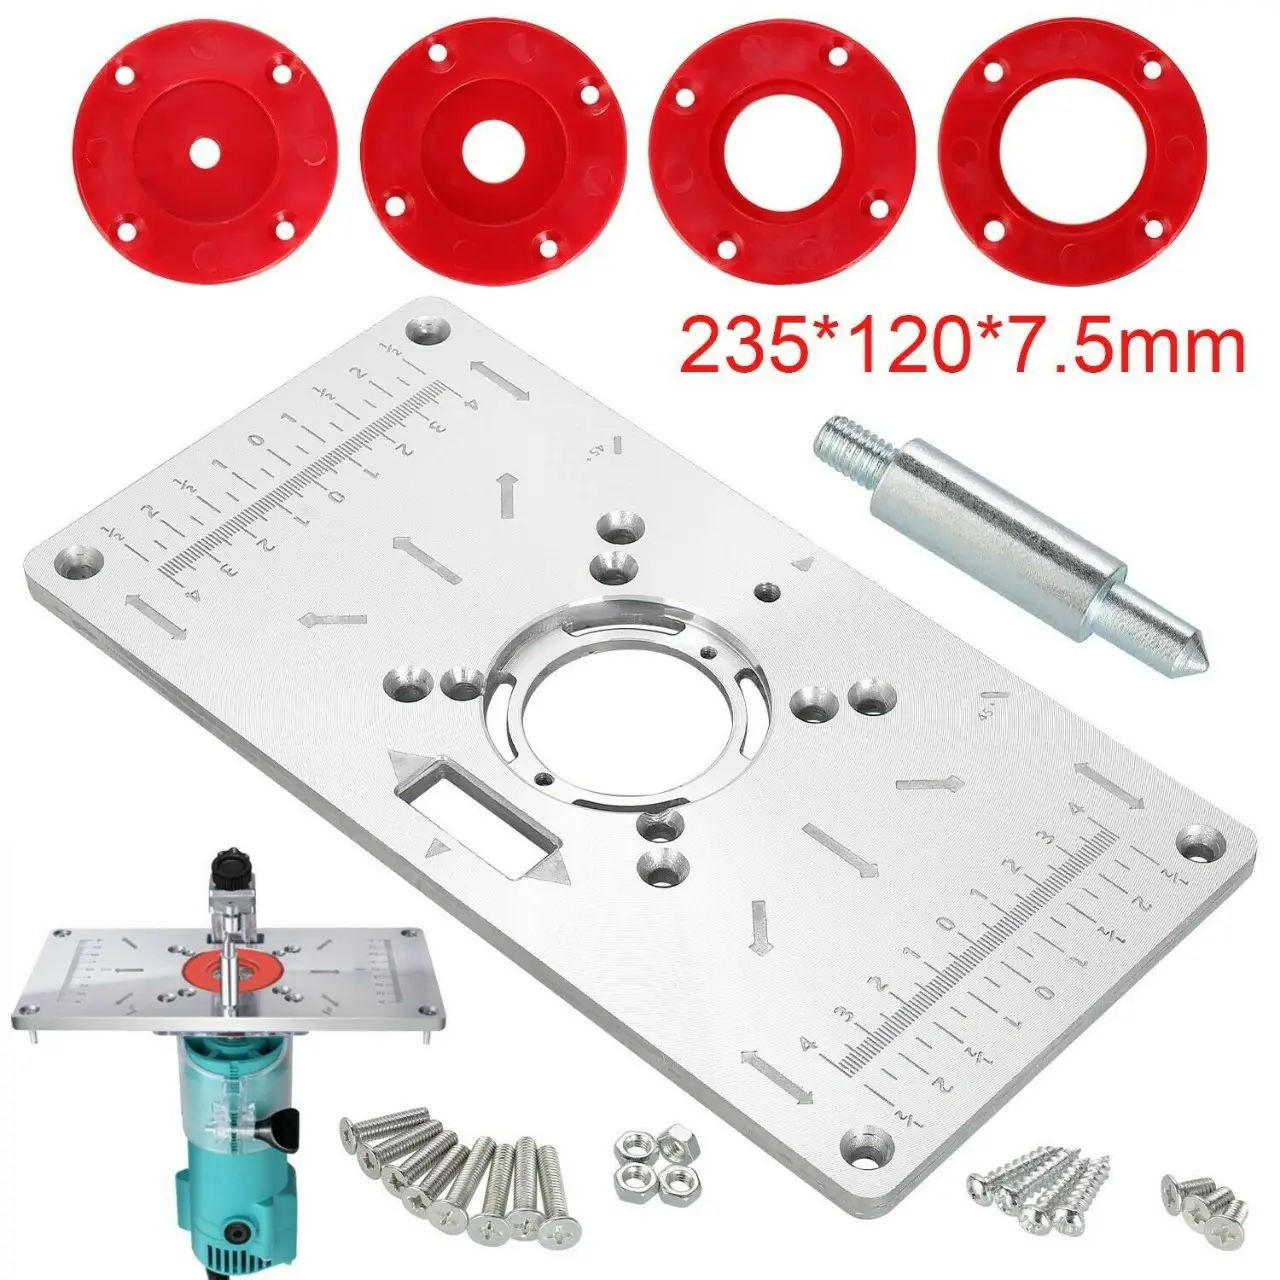 New Woodworking Router Table Insert Plate Aluminum Trimming Machine Engraving Flip Board with 4 Rings Router Table Insert Plate